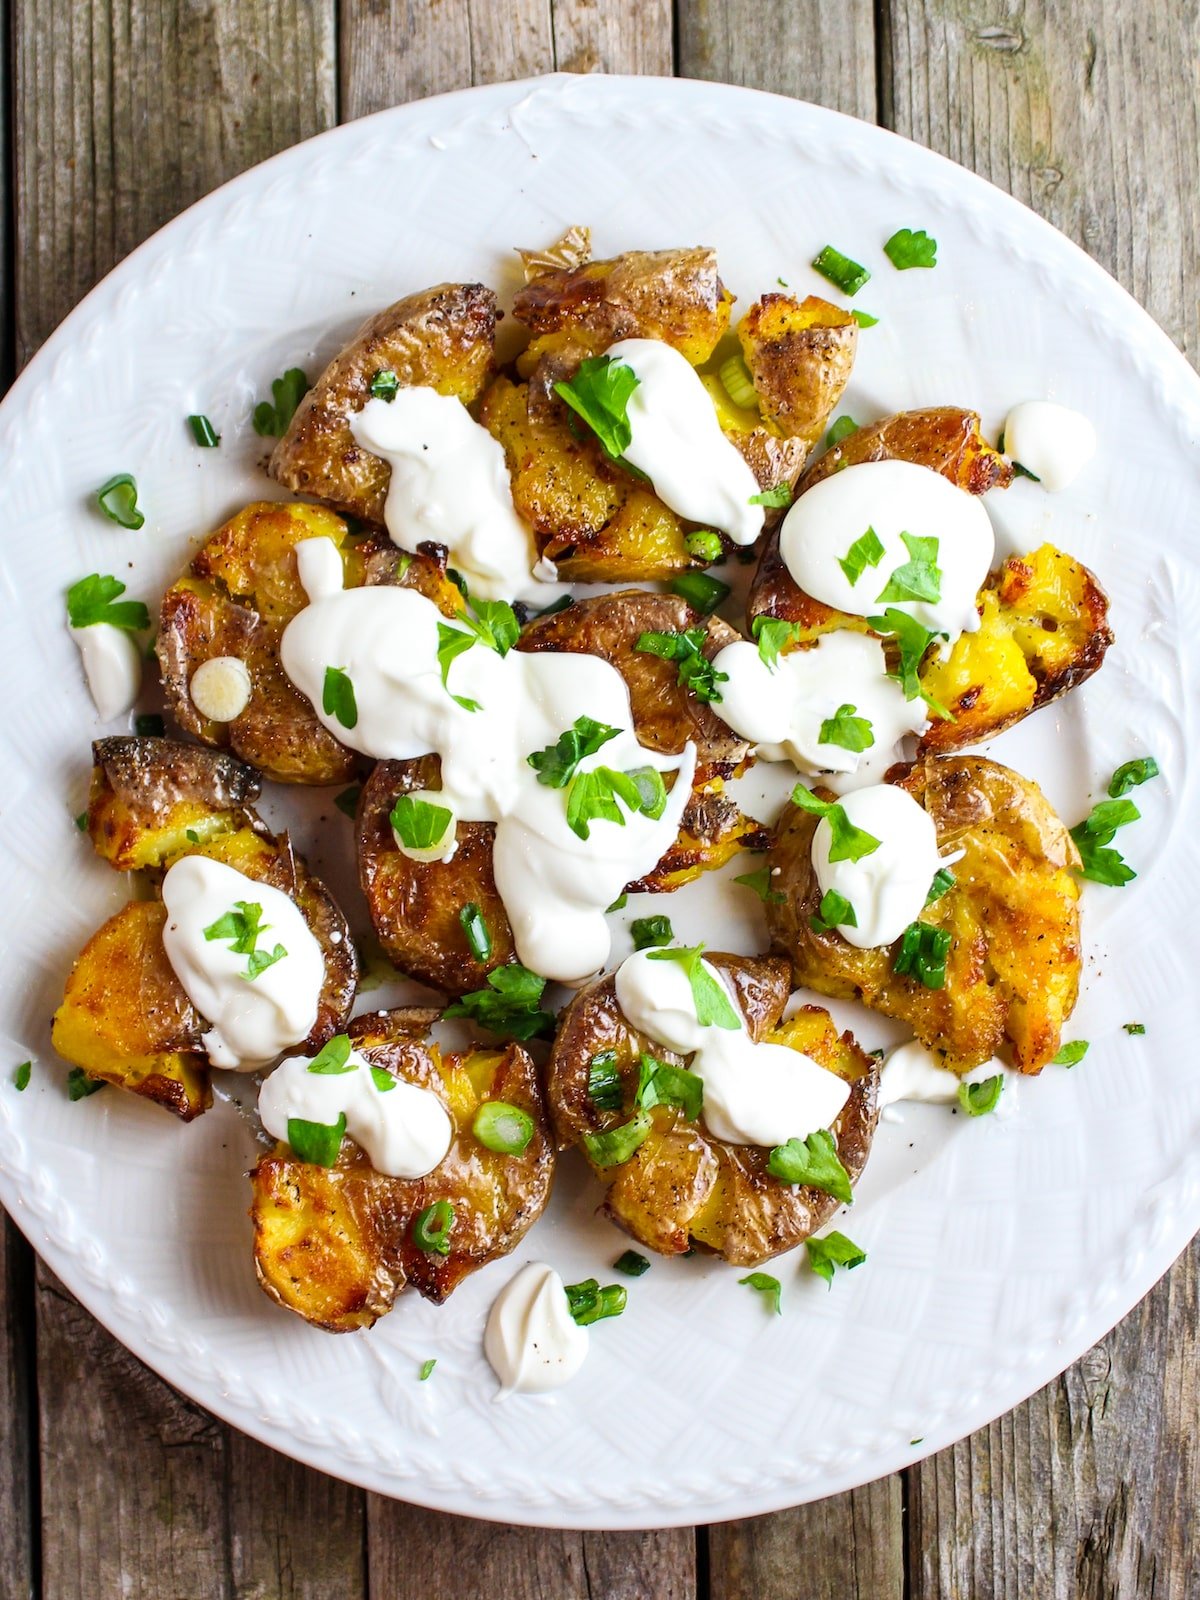 Potatoes on a plate with sour cream and onions.